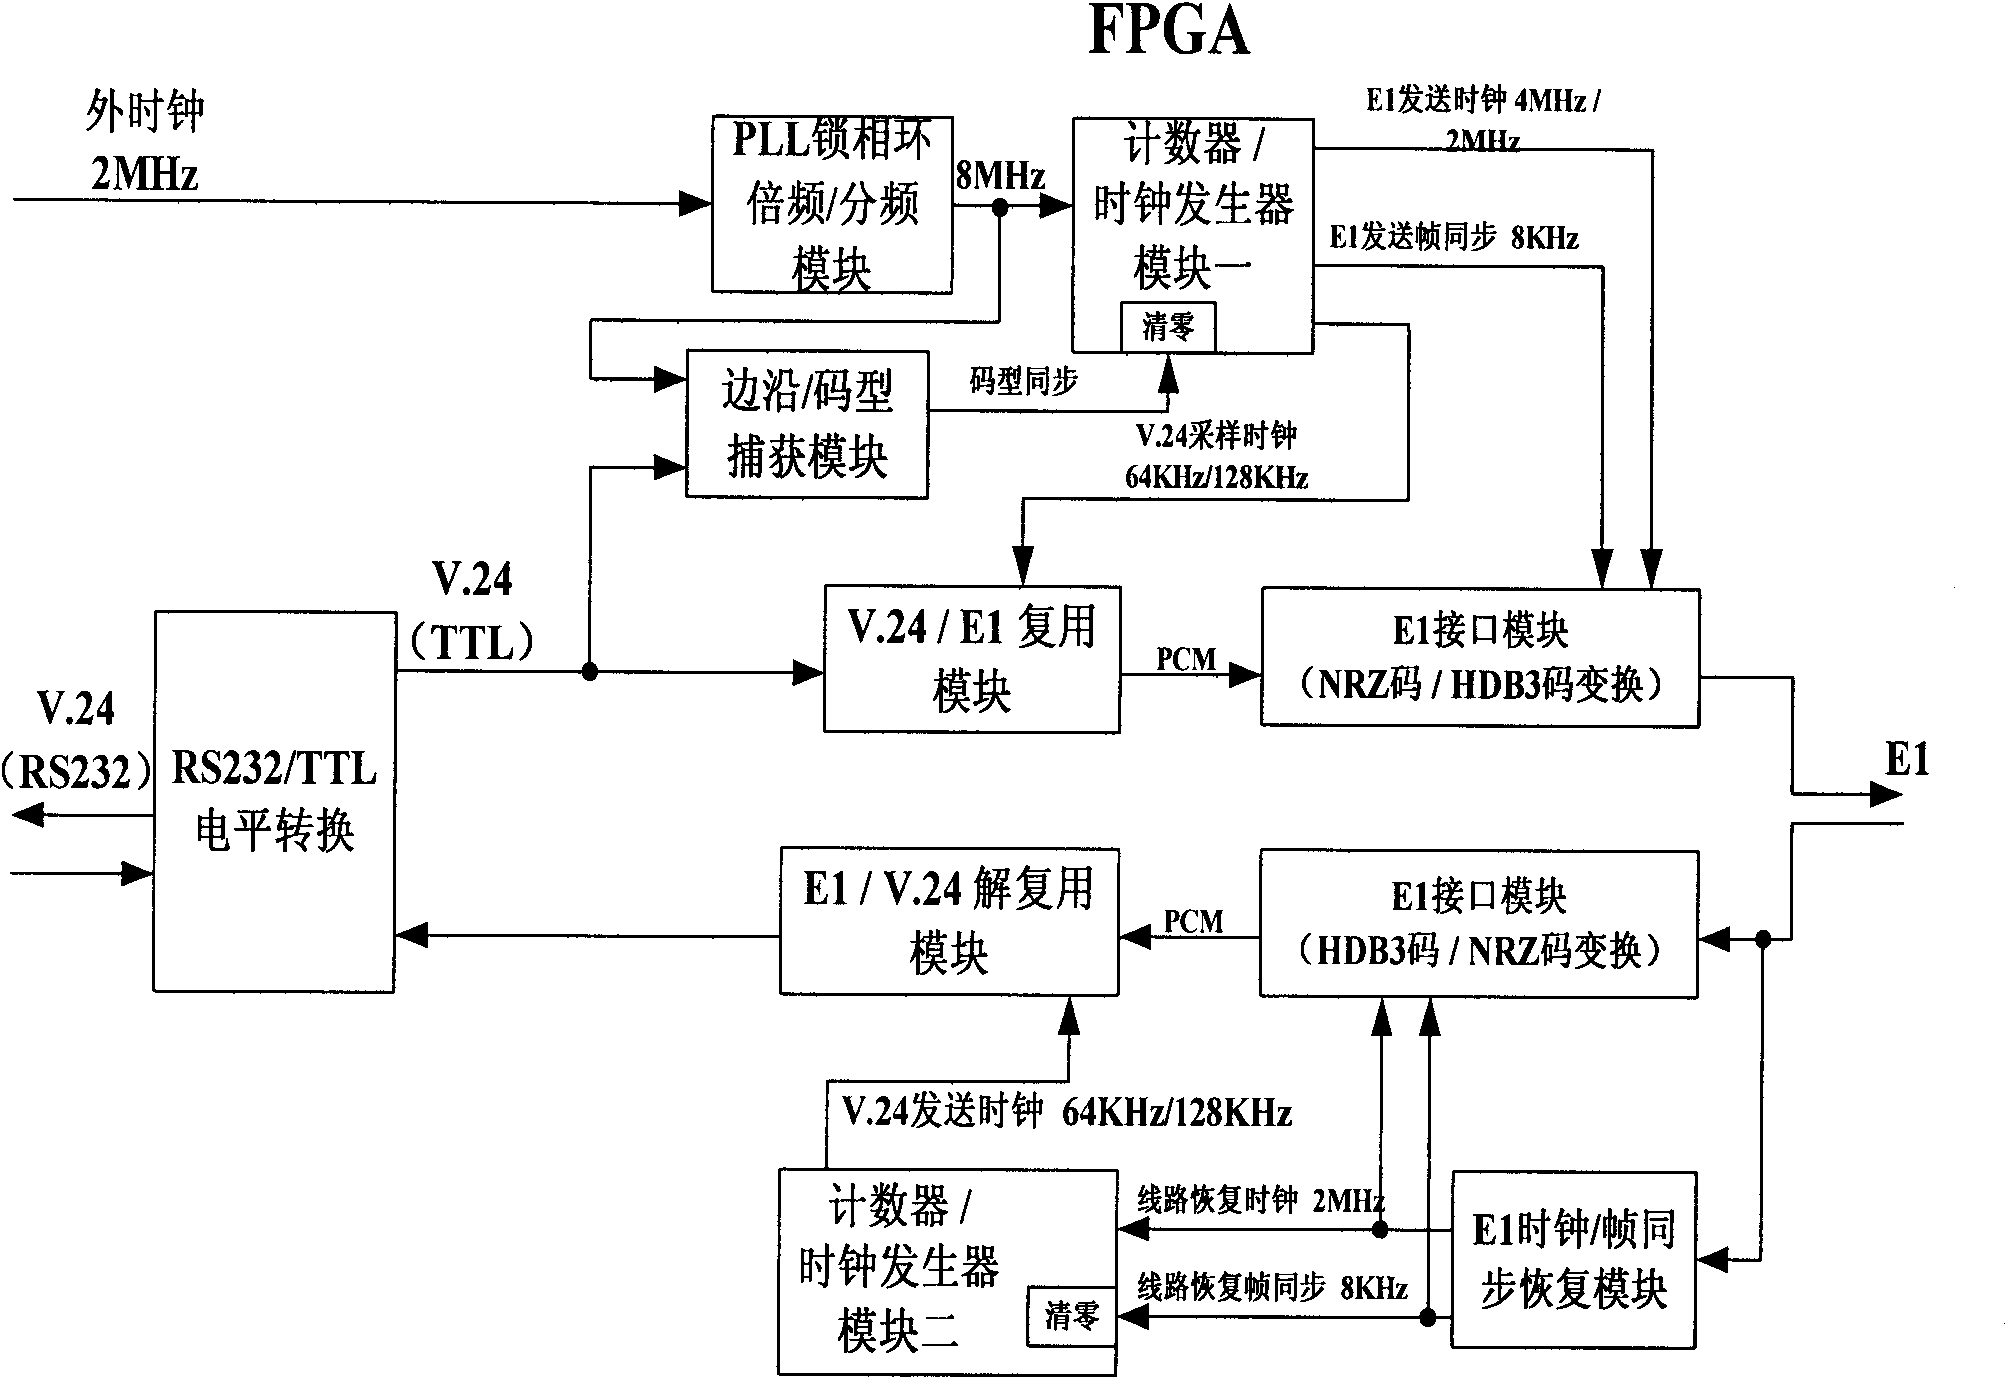 Device for realizing fixed forwarding delay of V.24 interface multiplexer